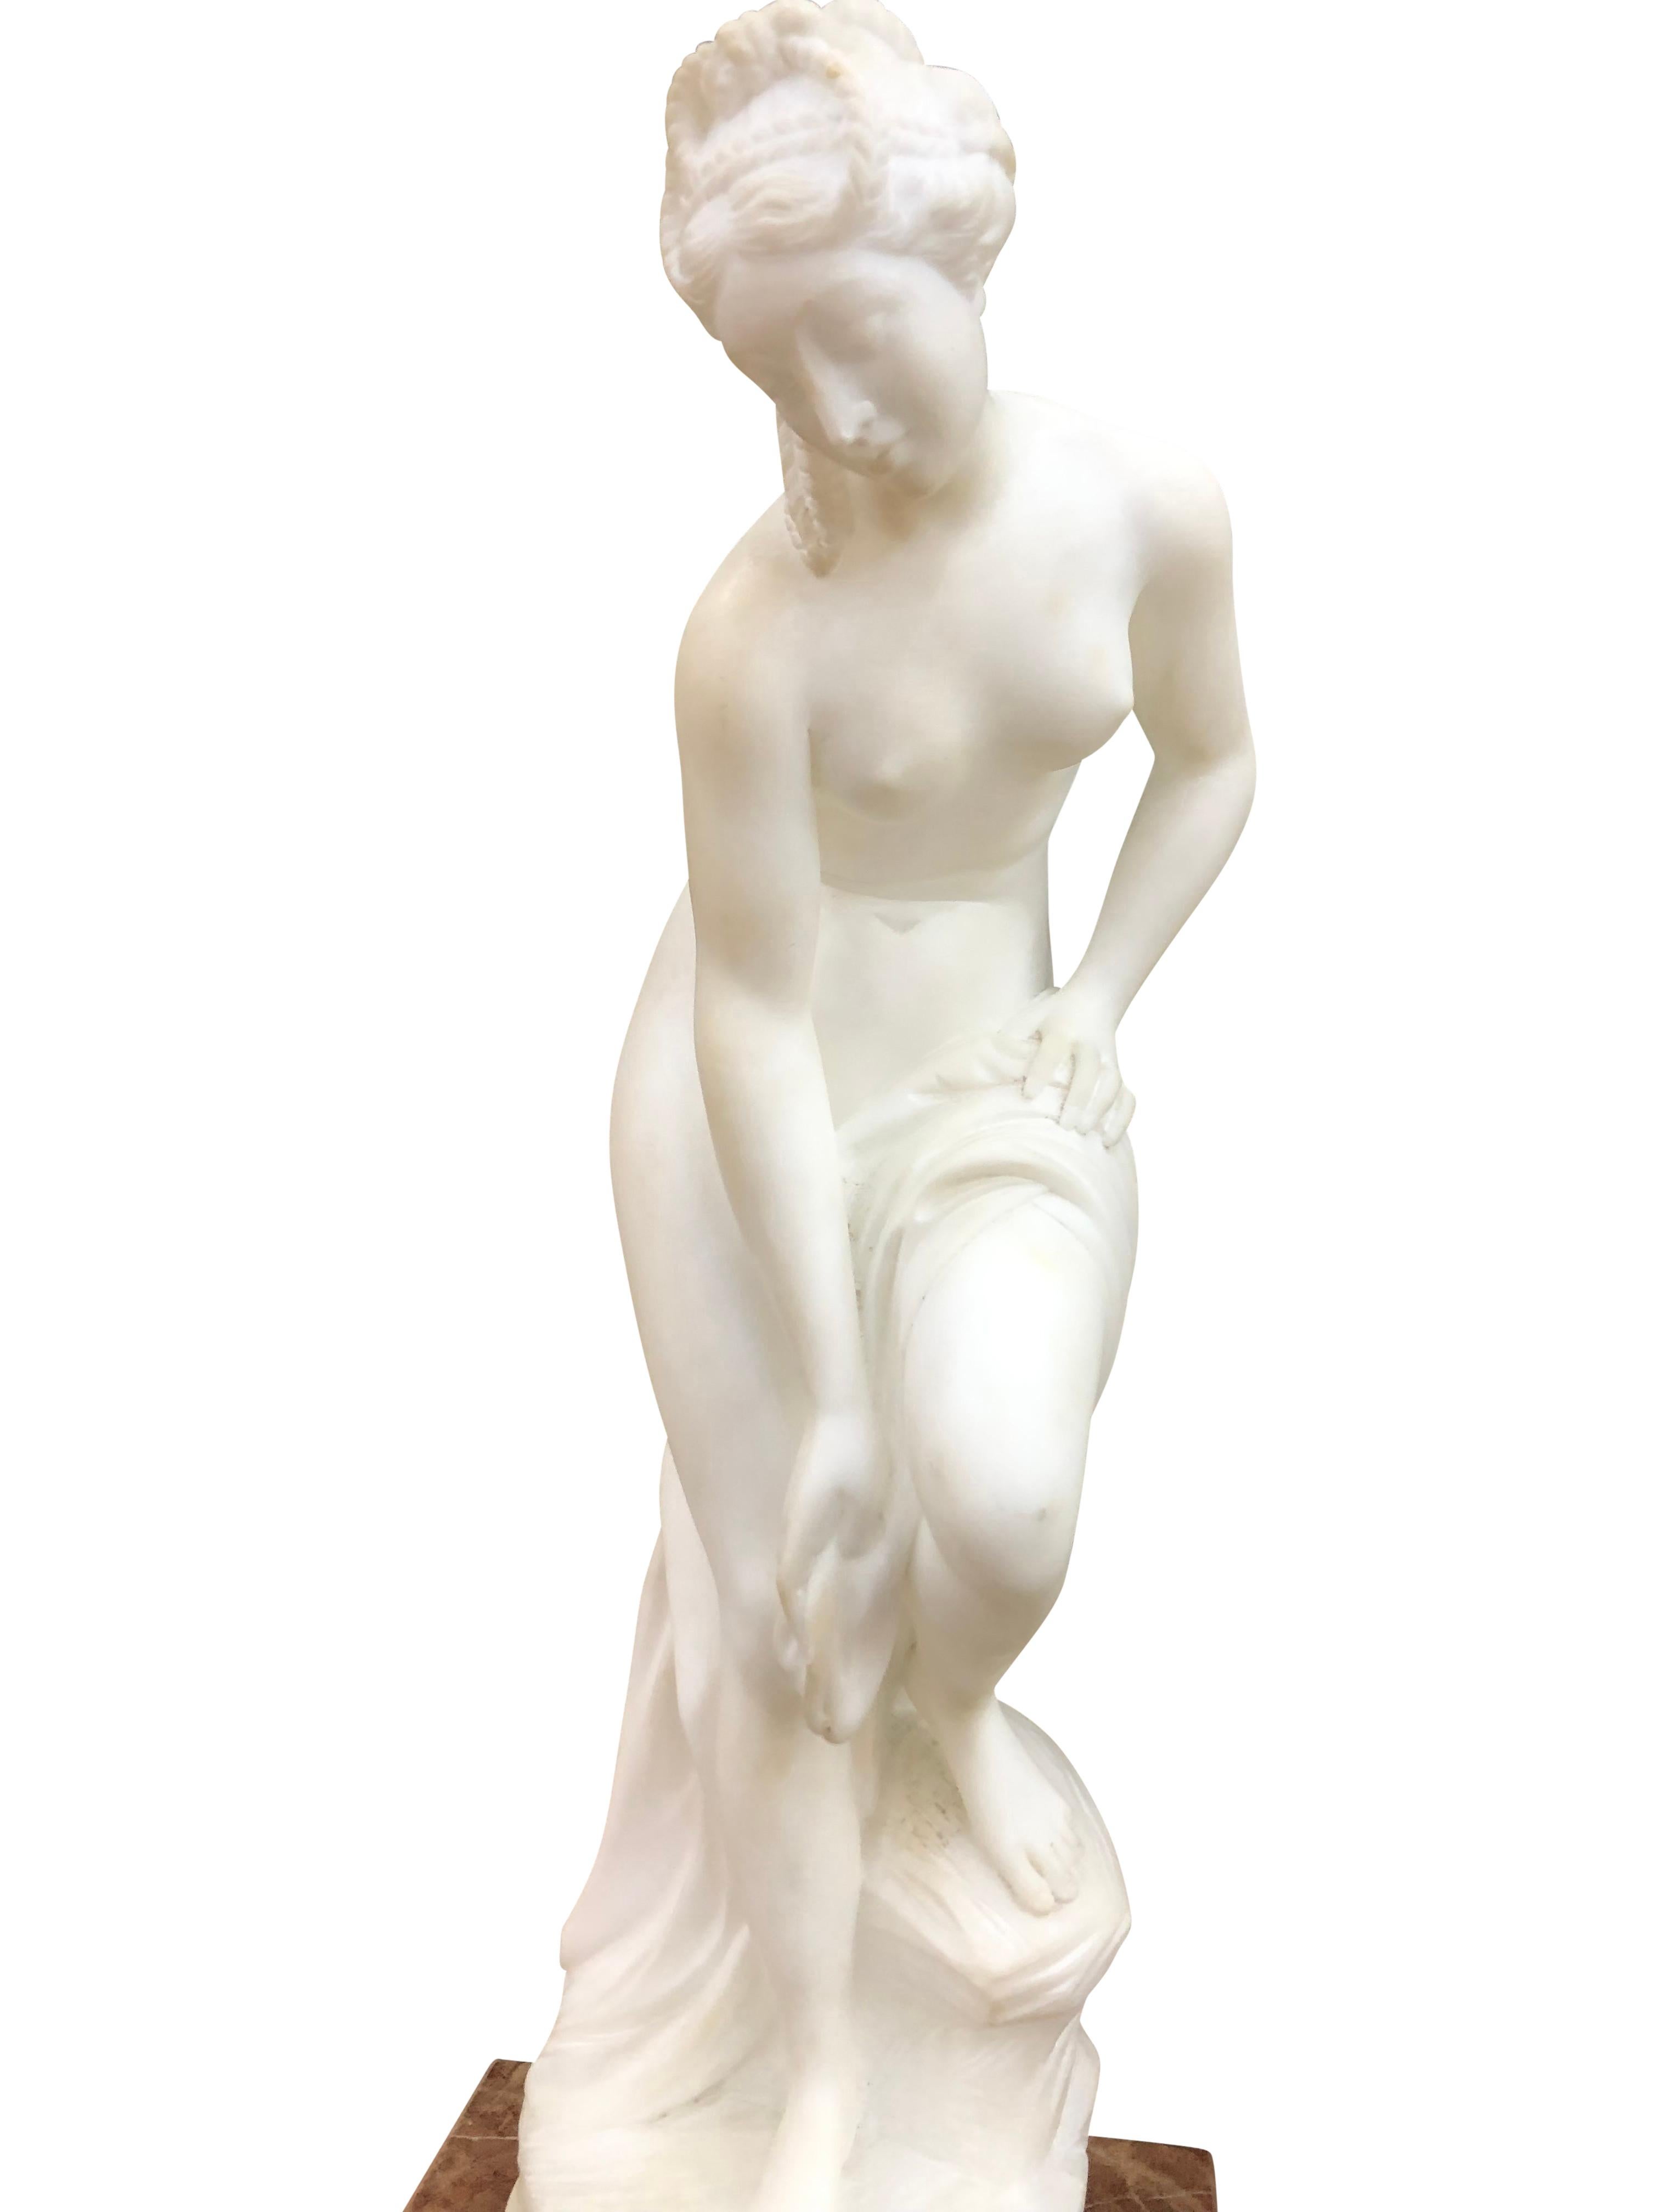 Pair of Antique Italian Marble Sculpture of Classical Female Nude Figures. Crafted with exquisite precision, each piece depicts a captivating female nude figure, celebrating the idealized beauty of the human form. Meticulously carved from rich